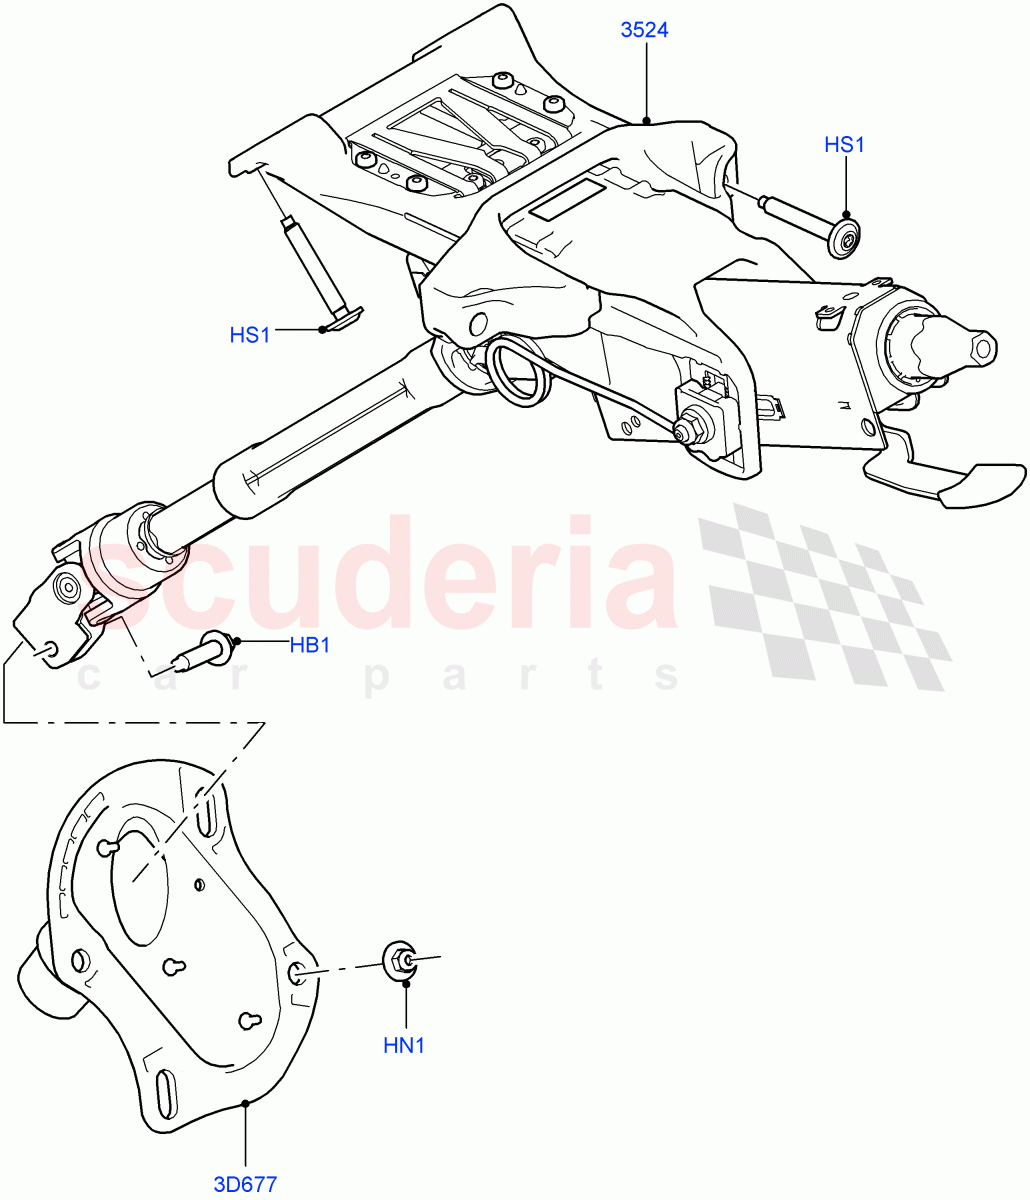 Steering Column(Itatiaia (Brazil))((V)FROMGT000001) of Land Rover Land Rover Discovery Sport (2015+) [2.2 Single Turbo Diesel]